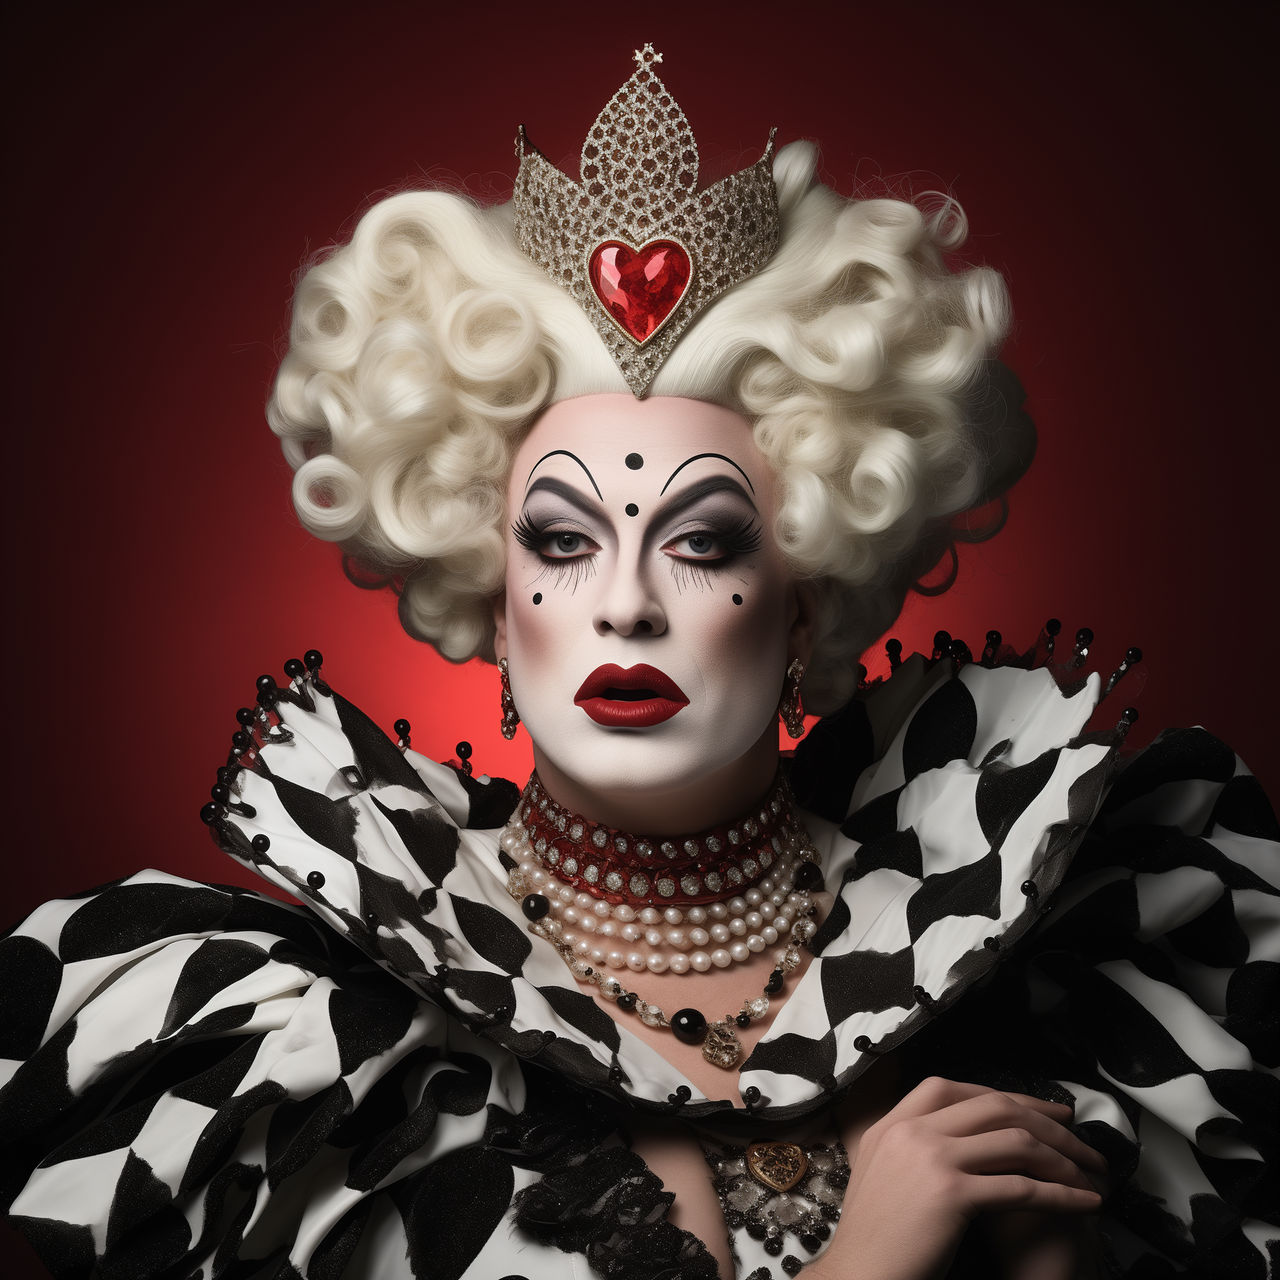 Drag Queen of Hearts 7 by Straygator69 on DeviantArt